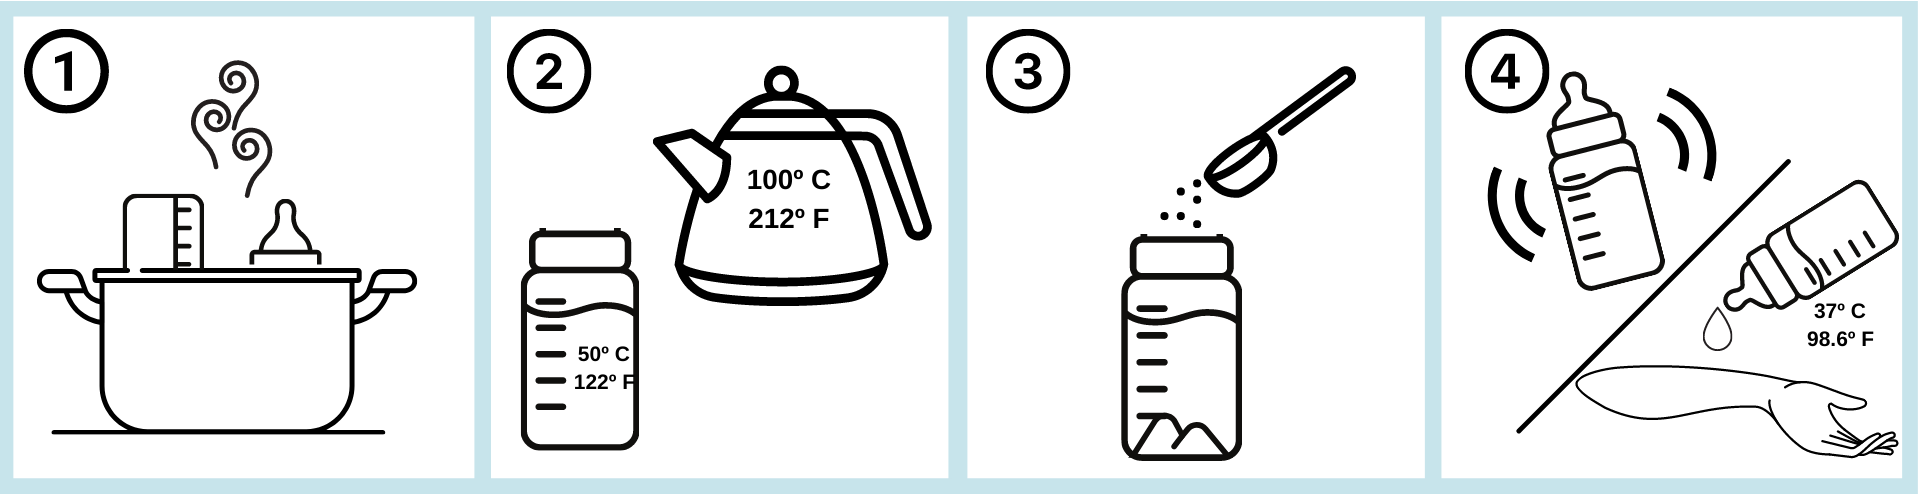 How to Boil Water at Room Temperature